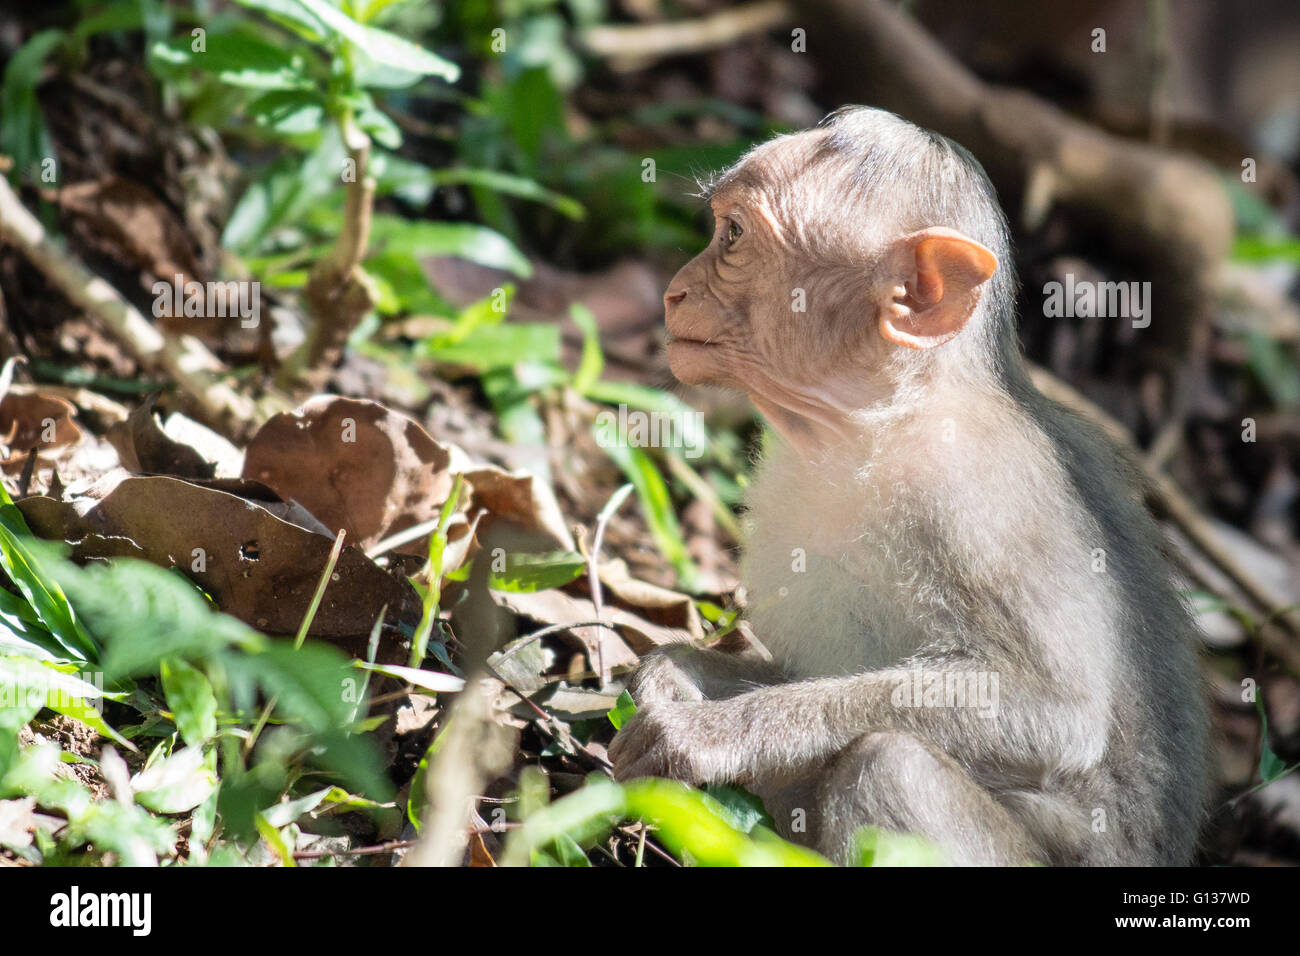 Juvenile Bonnet Macaque (Macaca Radiata) sitting on forest floor Stock Photo